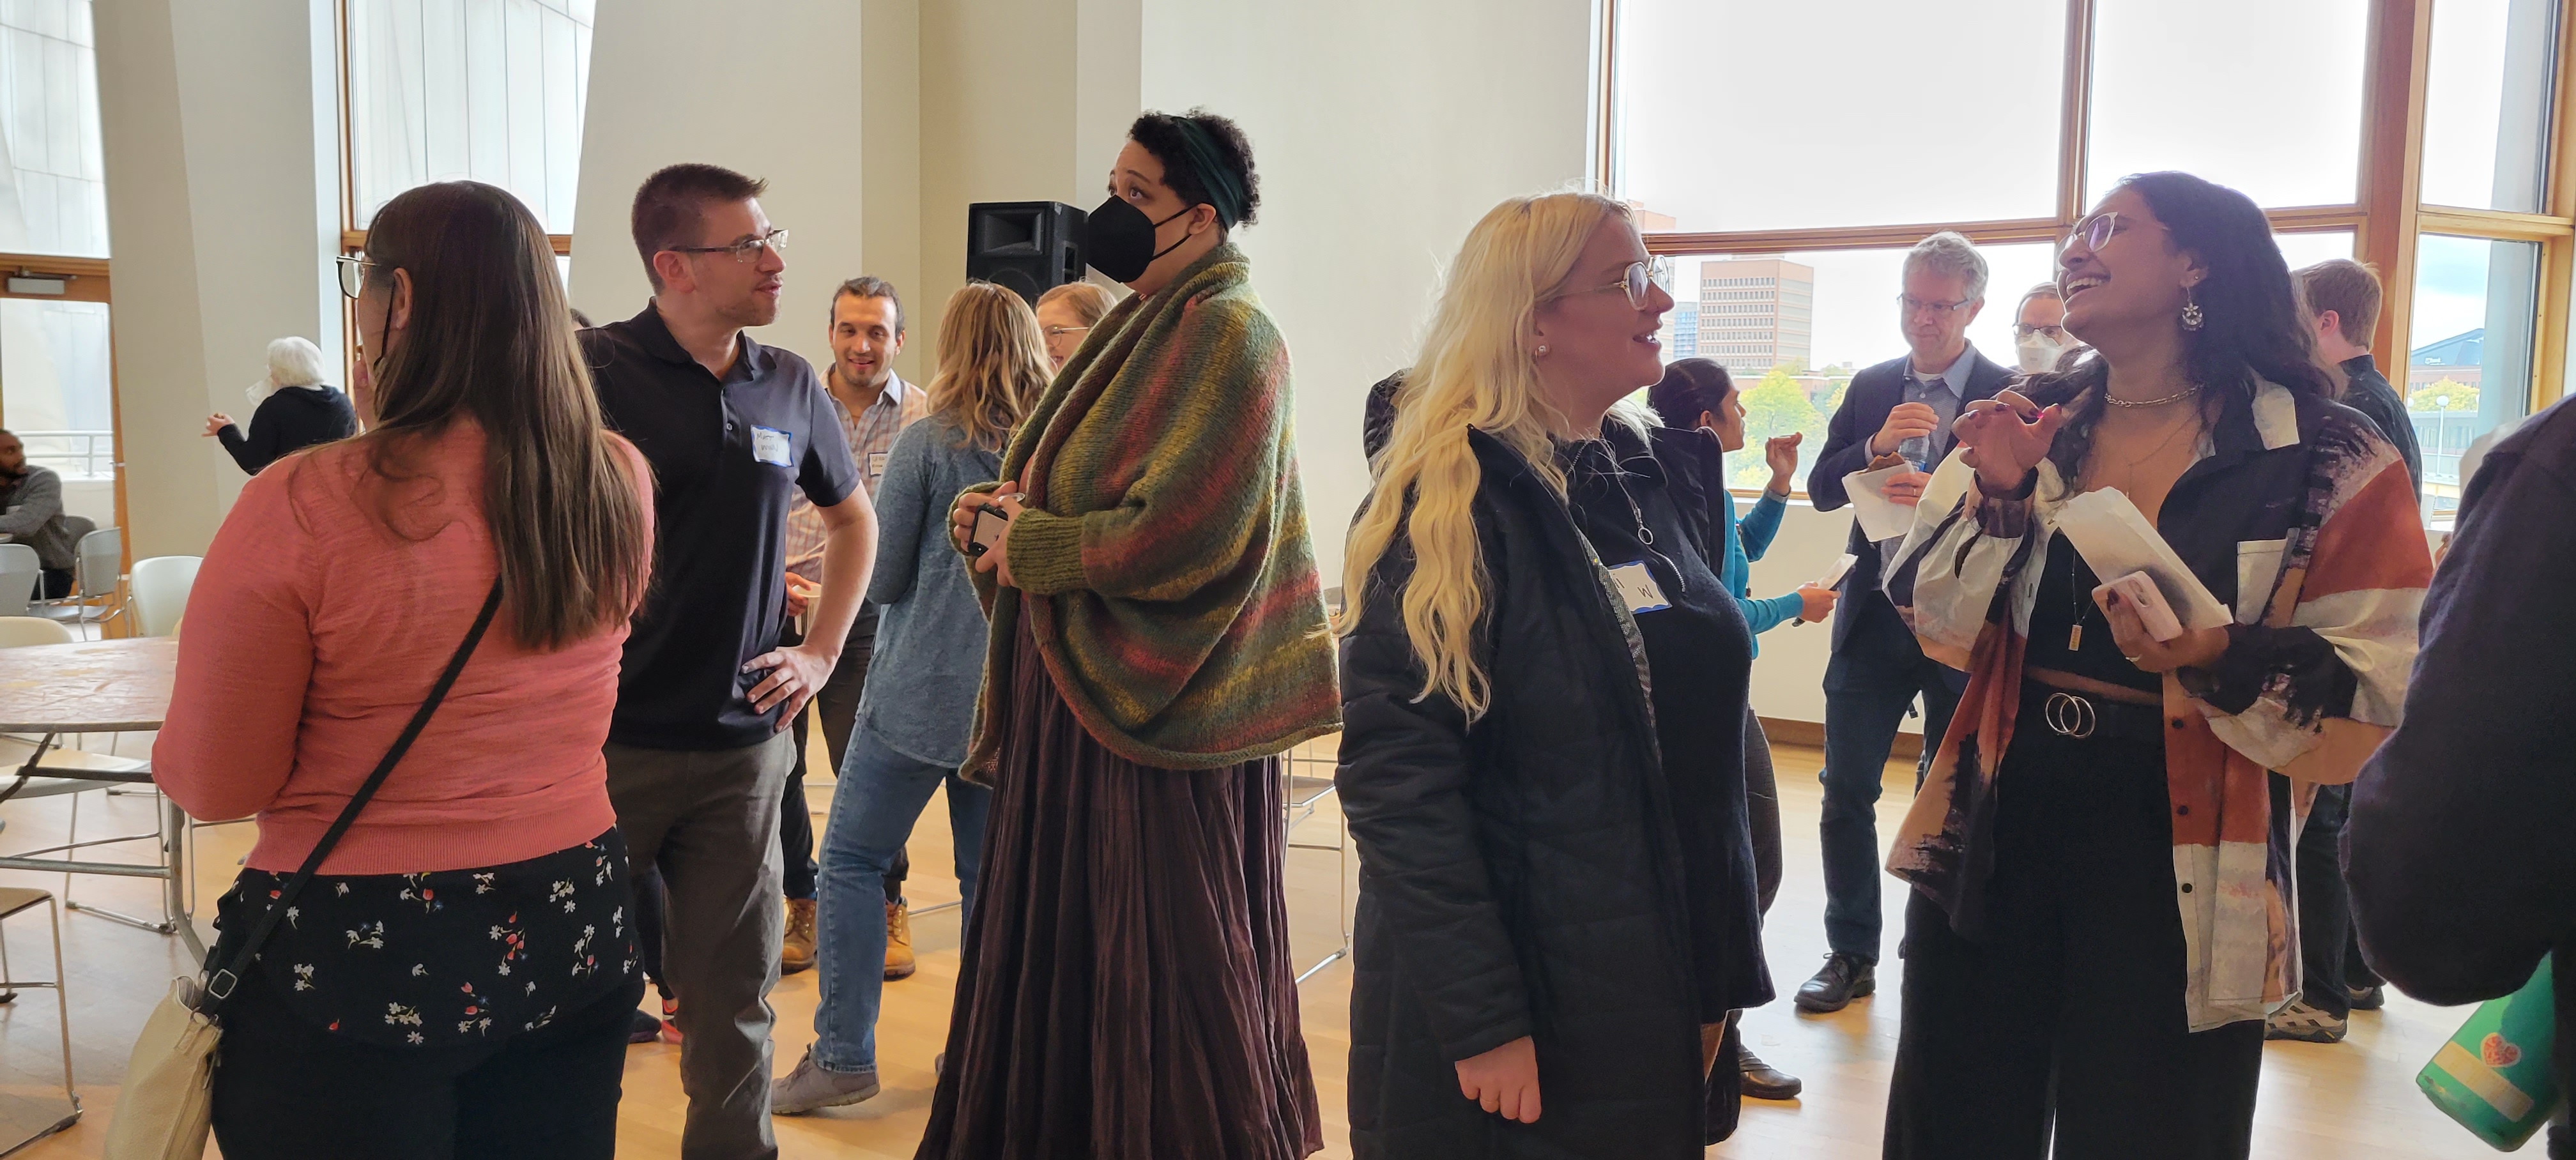 Group of attendees chatting in the Weisman gallery during the coffee break